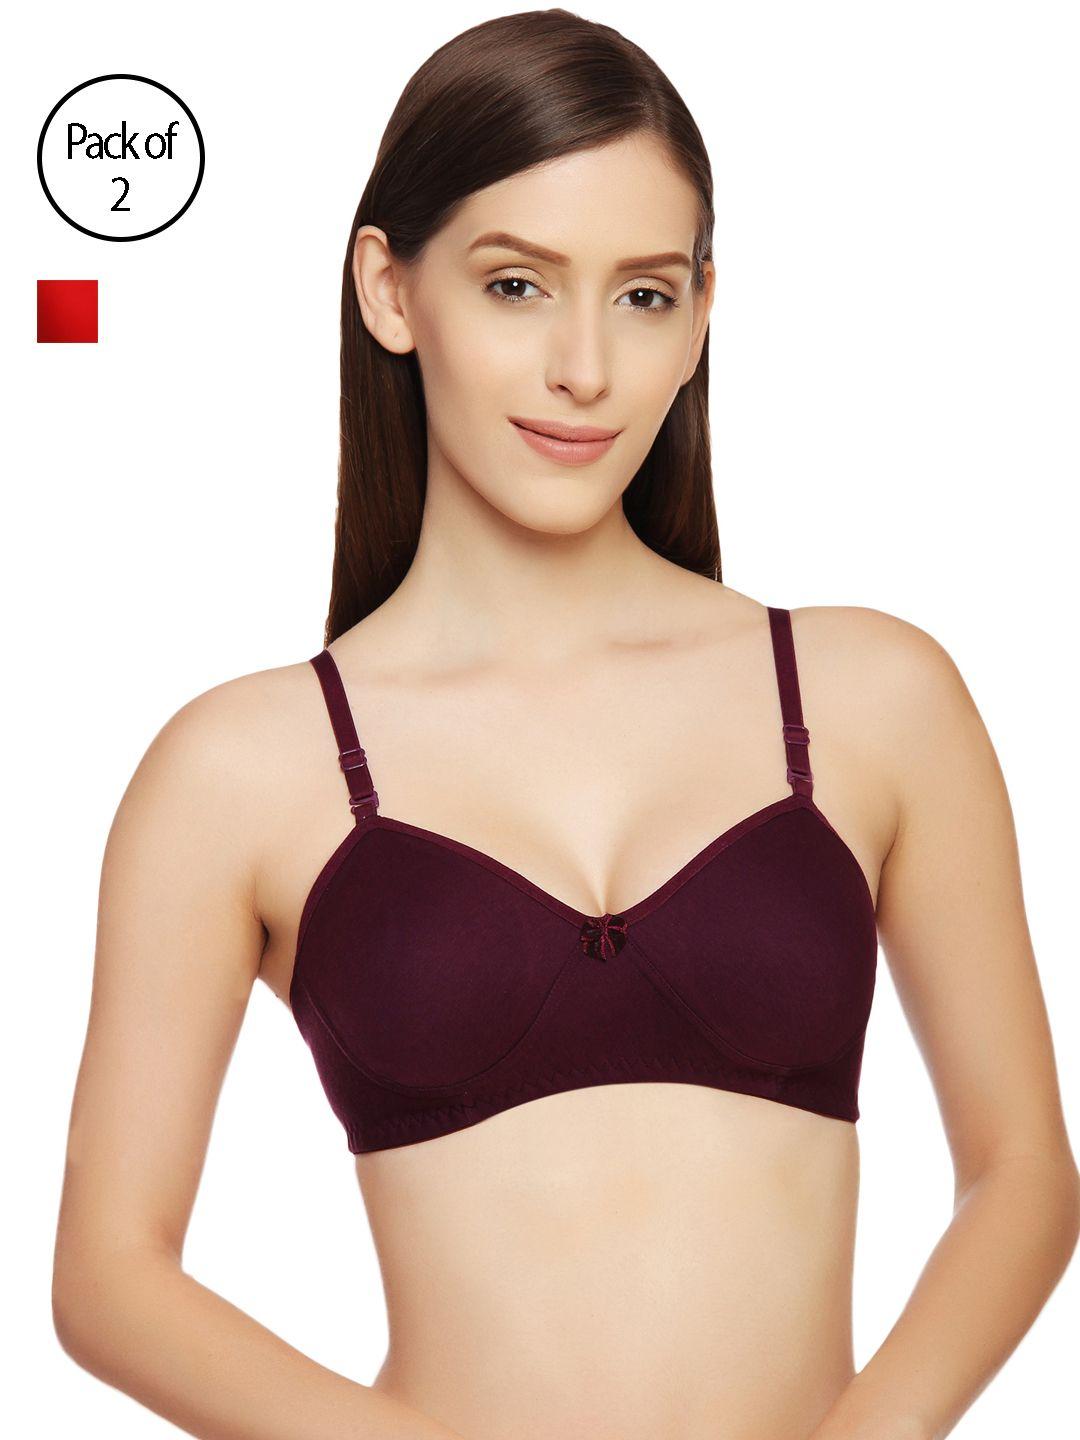 innocence women pack of 2 violet & red solid non-wired non padded demi bra